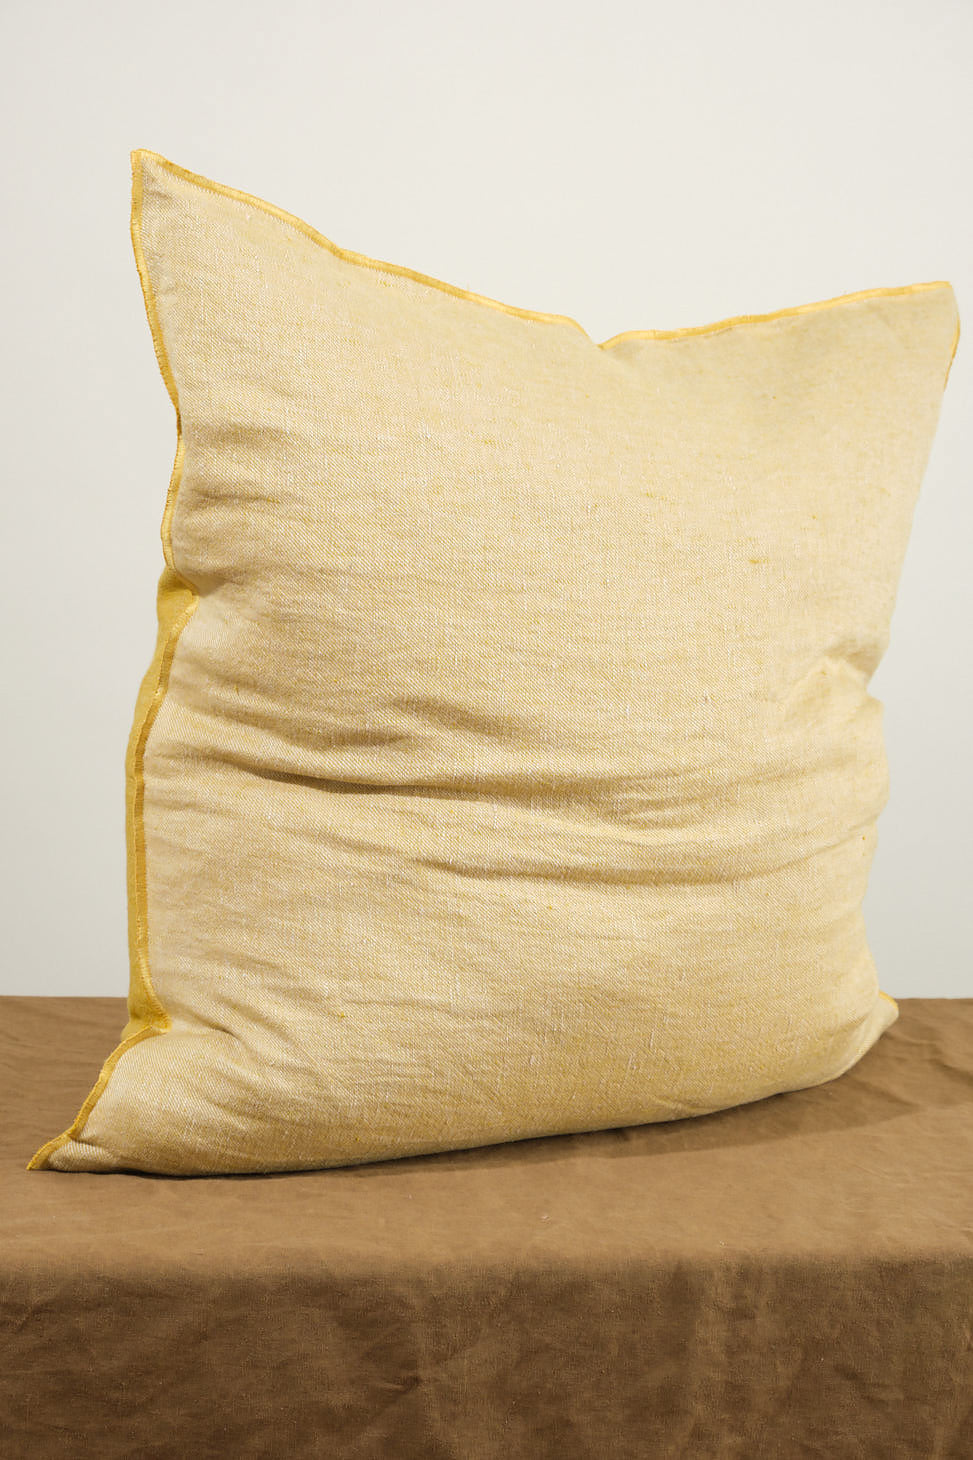 Back of 26" X 26" Crumpled Washed Linen Vice Versa Cushion in Ocre